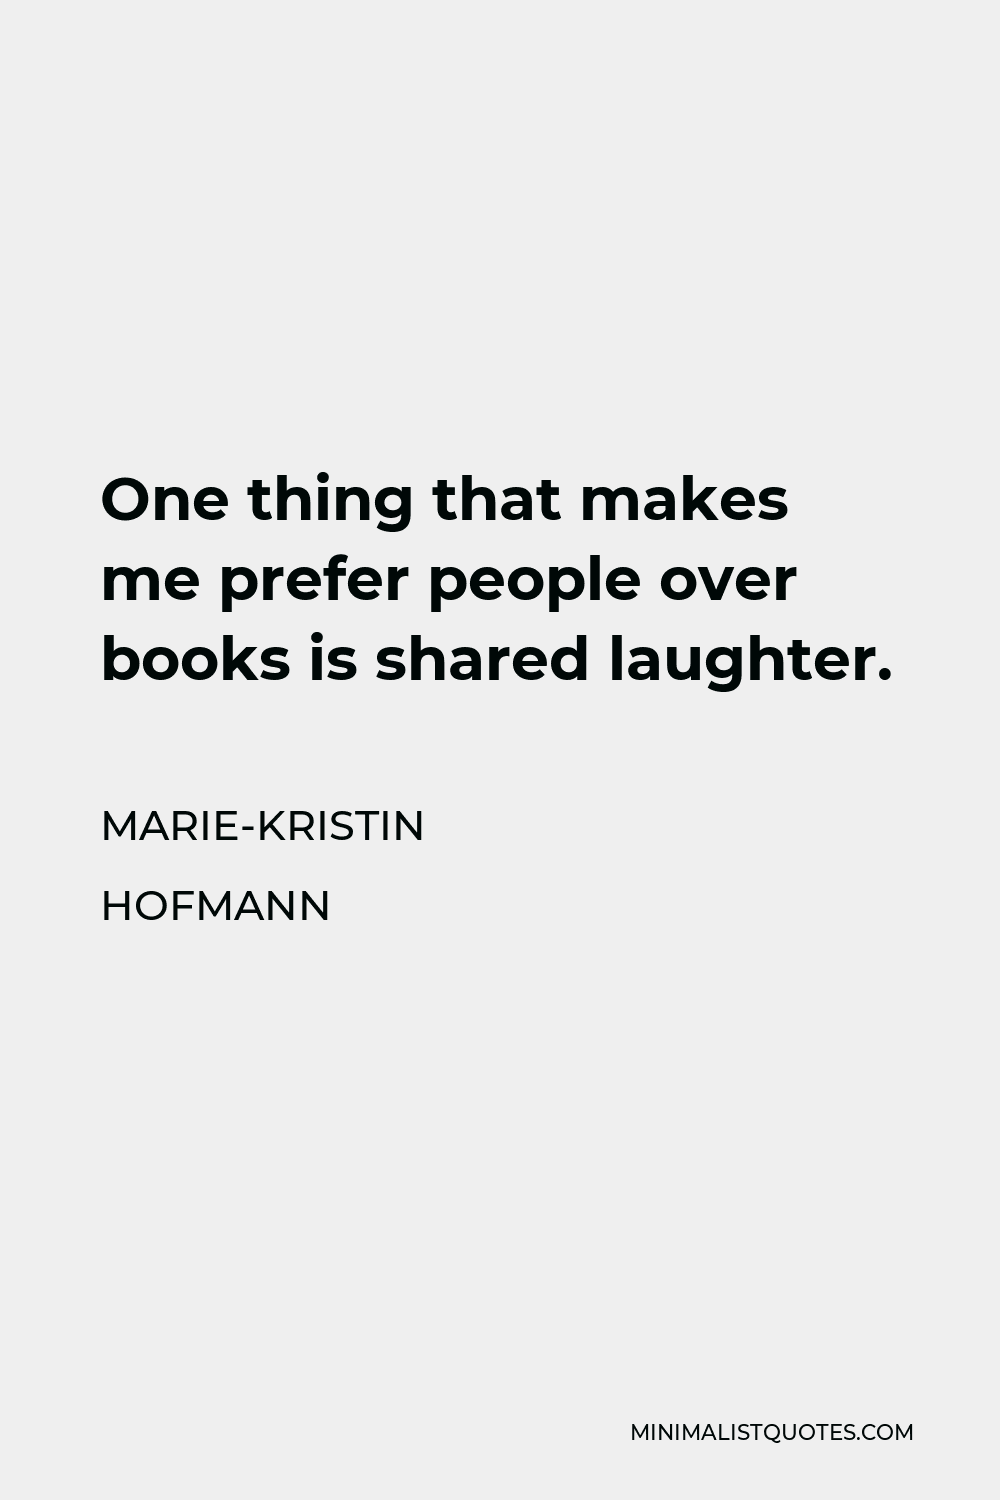 Marie-Kristin Hofmann Quote - One thing that makes me prefer people over books is shared laughter.